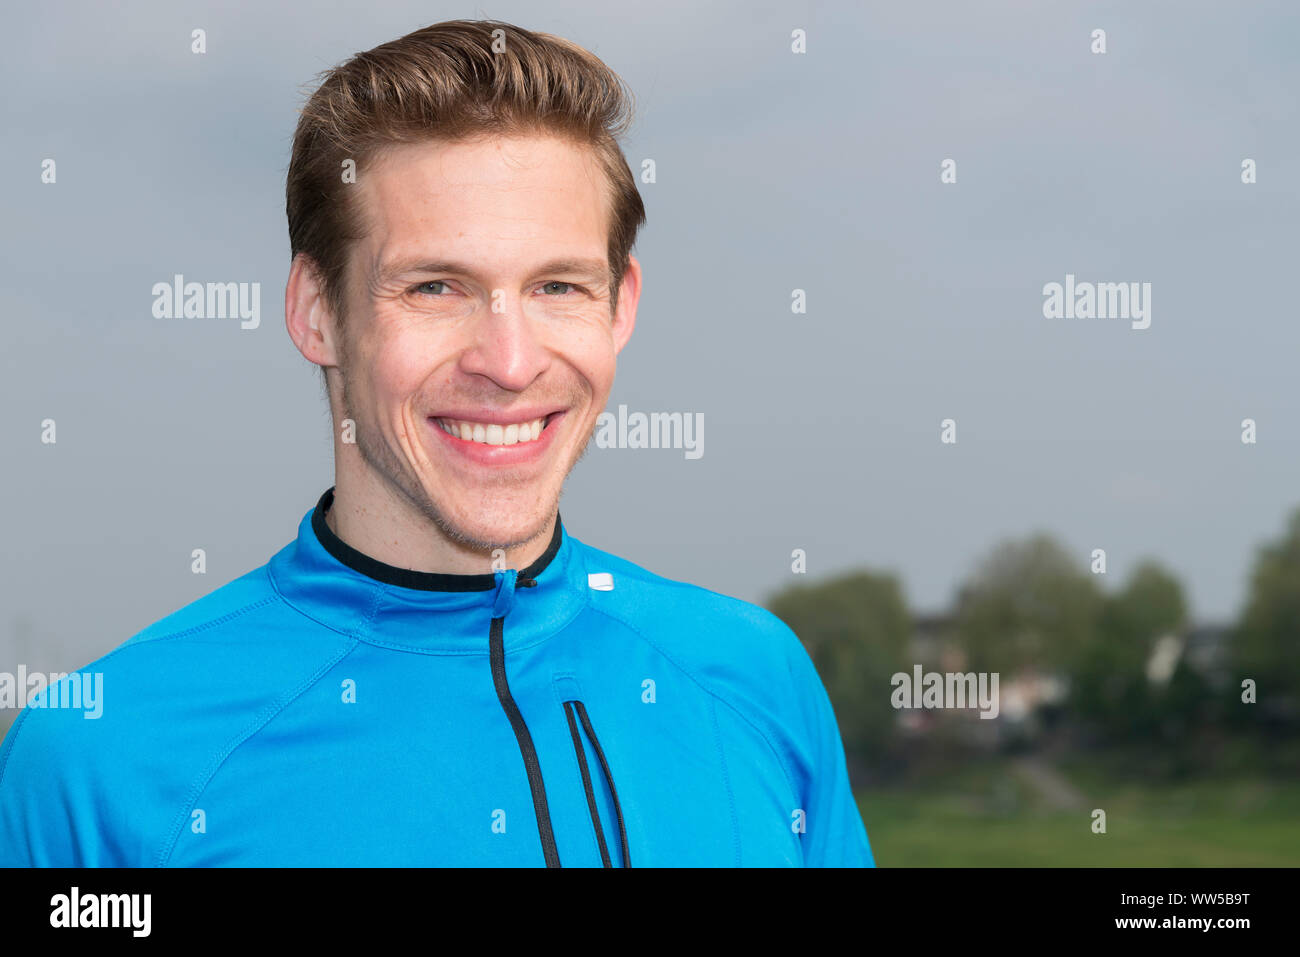 Man in blue tracksuit top smiling, looking at camera, portrait Stock Photo